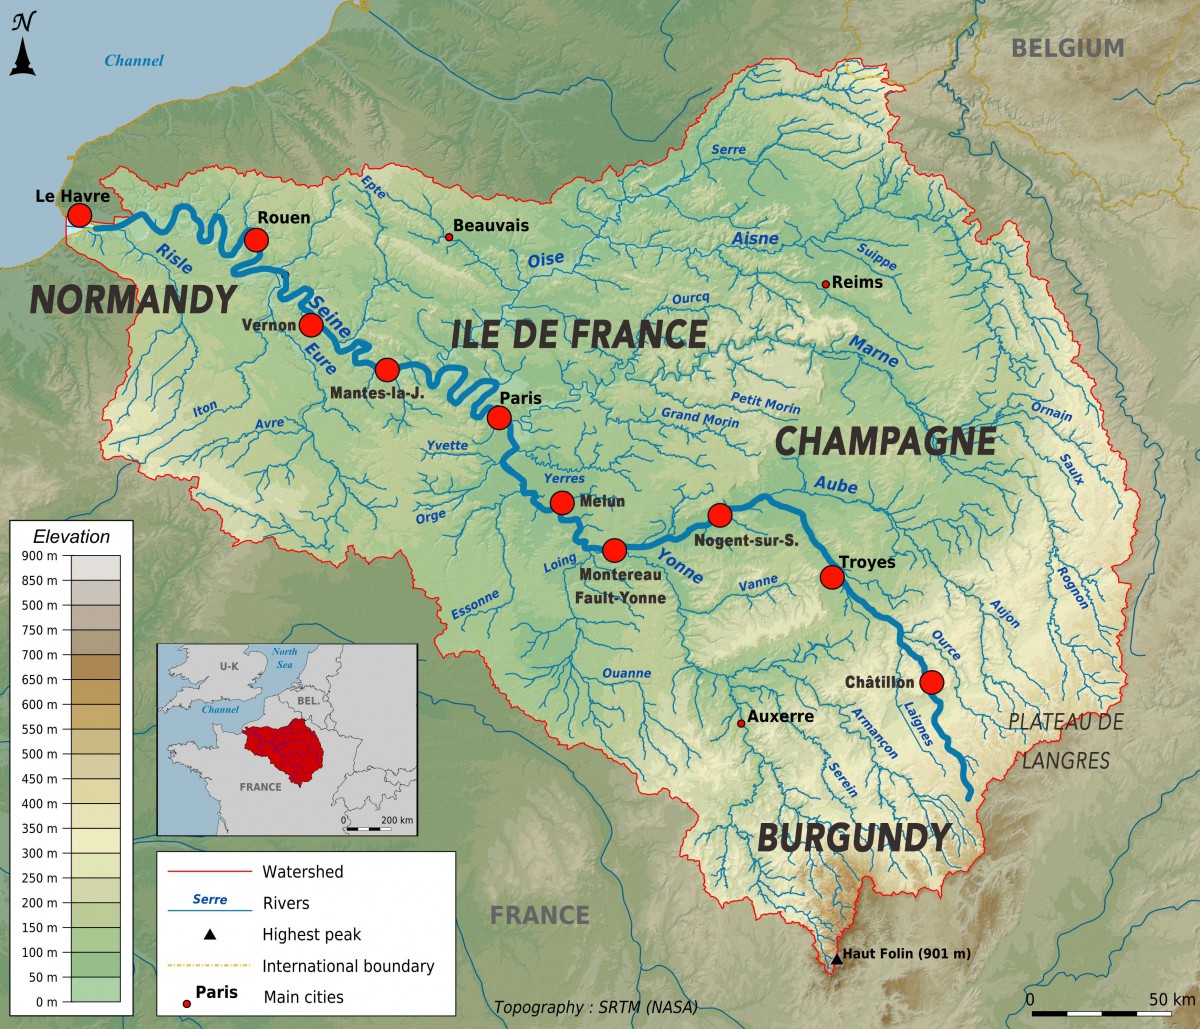 Topographic map of the Seine basin © Paul Passy - licence [CC BY-SA 3.0] from Wikimedia Commons